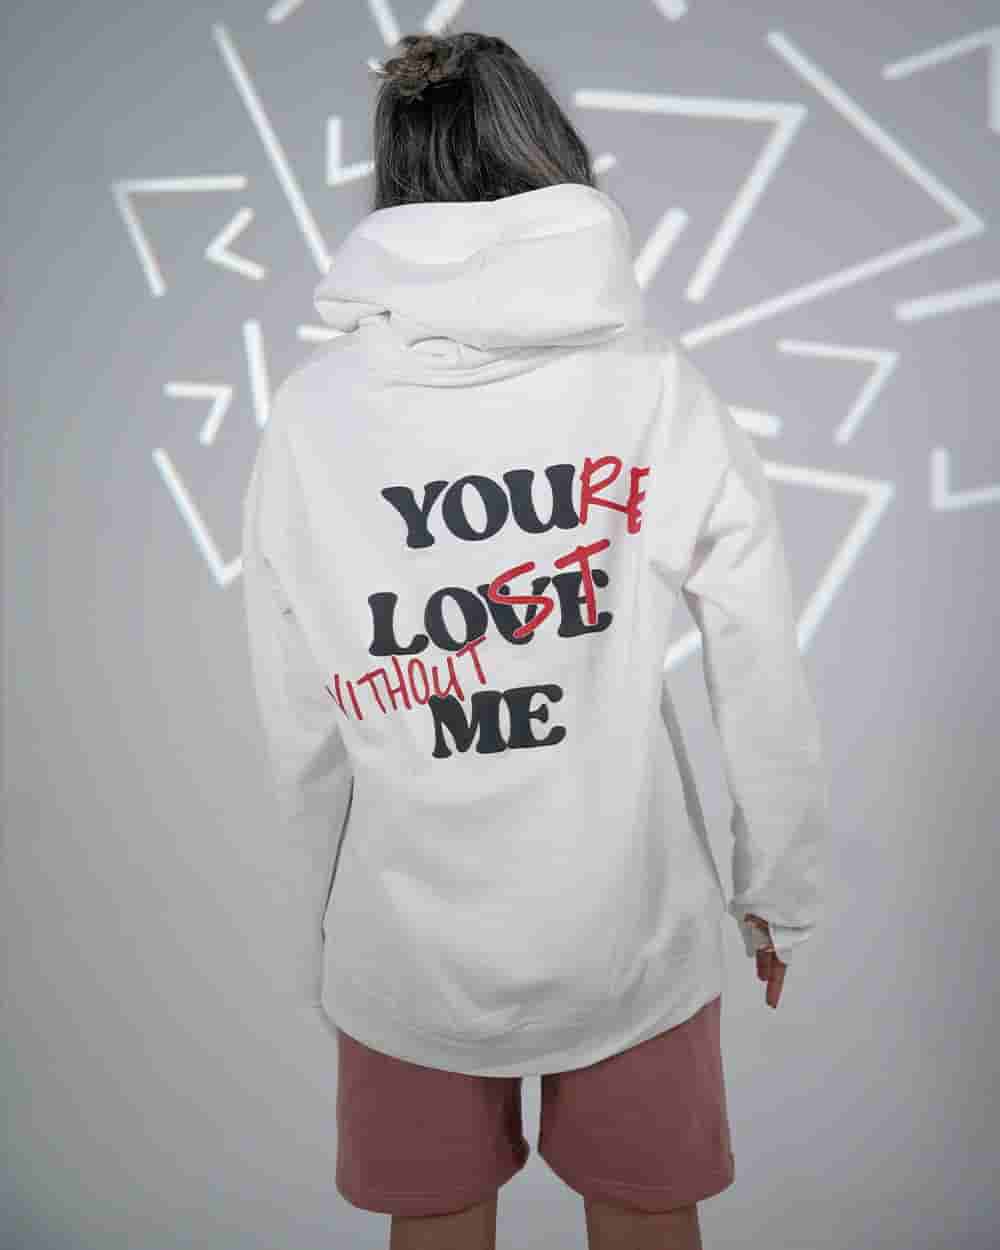 White - LoveLost - hoodie by My Store - 